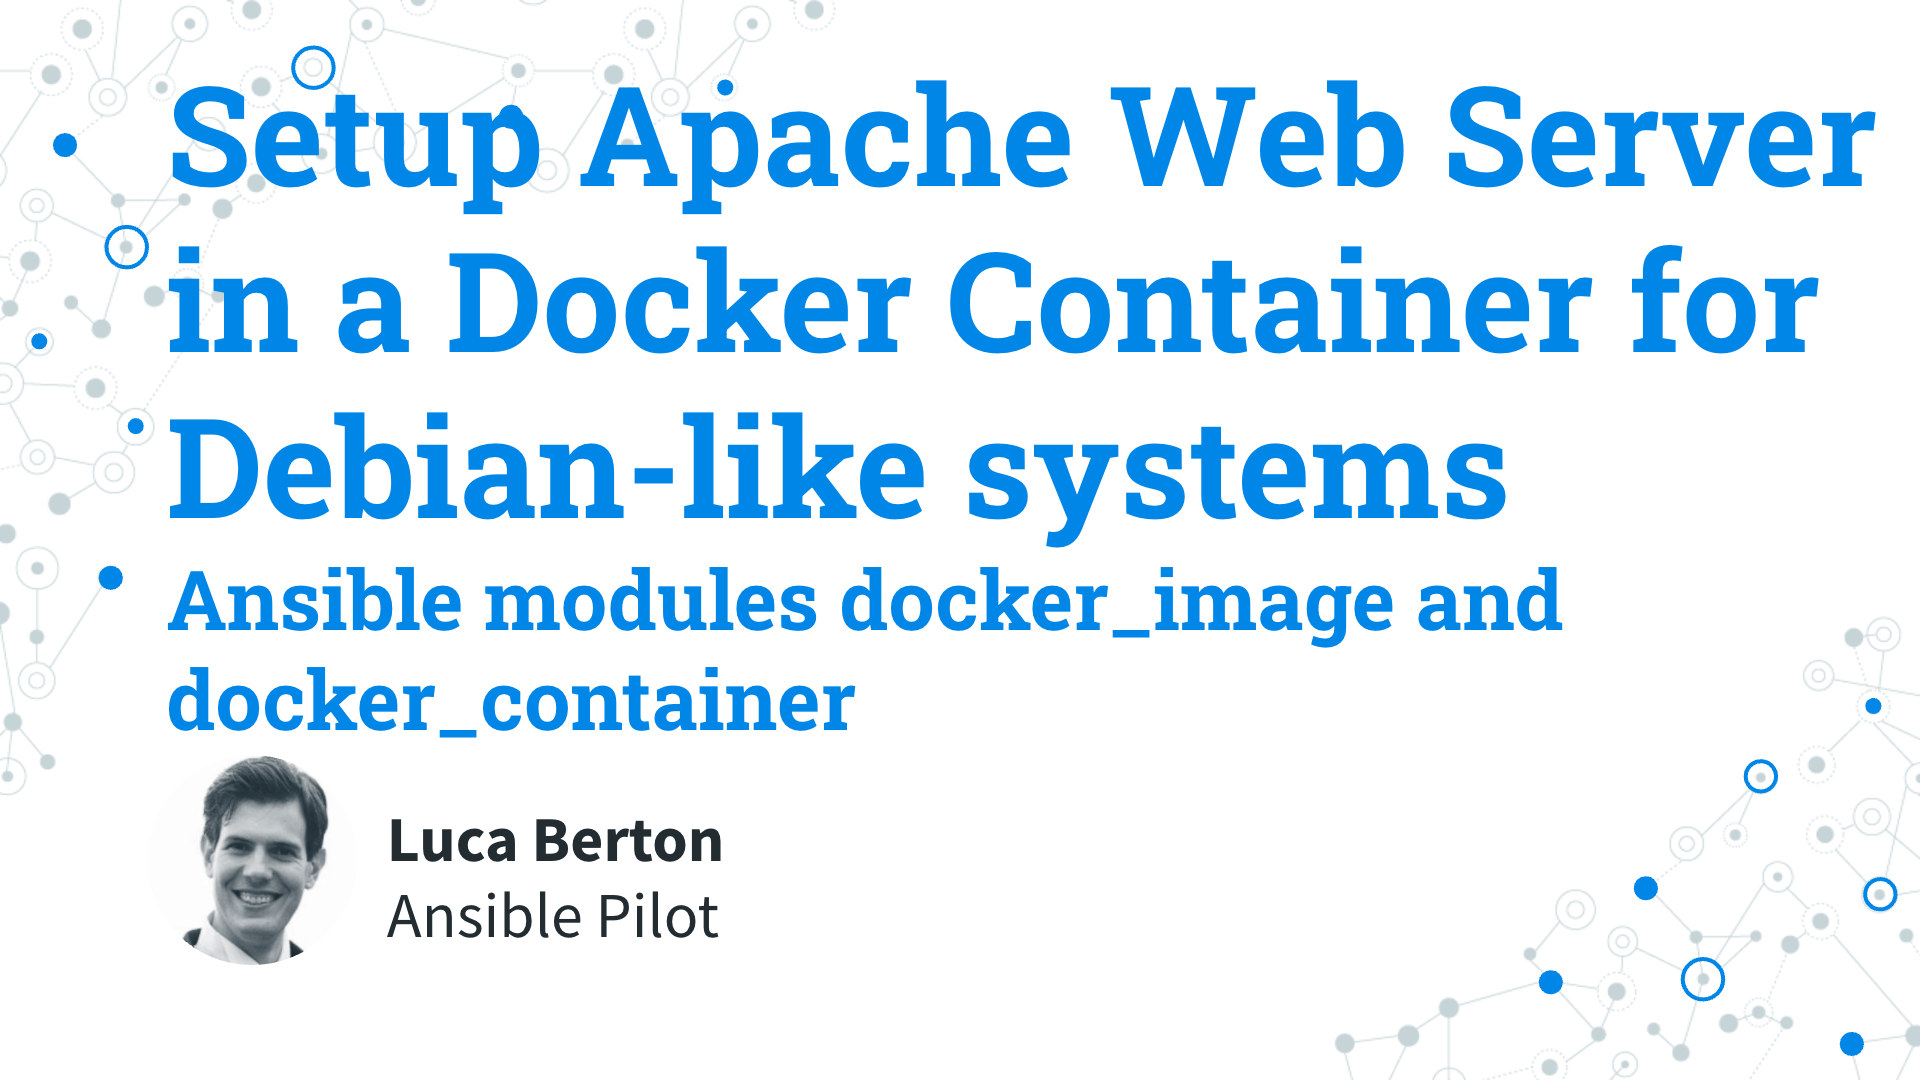 Deploy Apache Web Server in a Docker Container for Debian-like systems - Ansible modules docker_image and docker_container